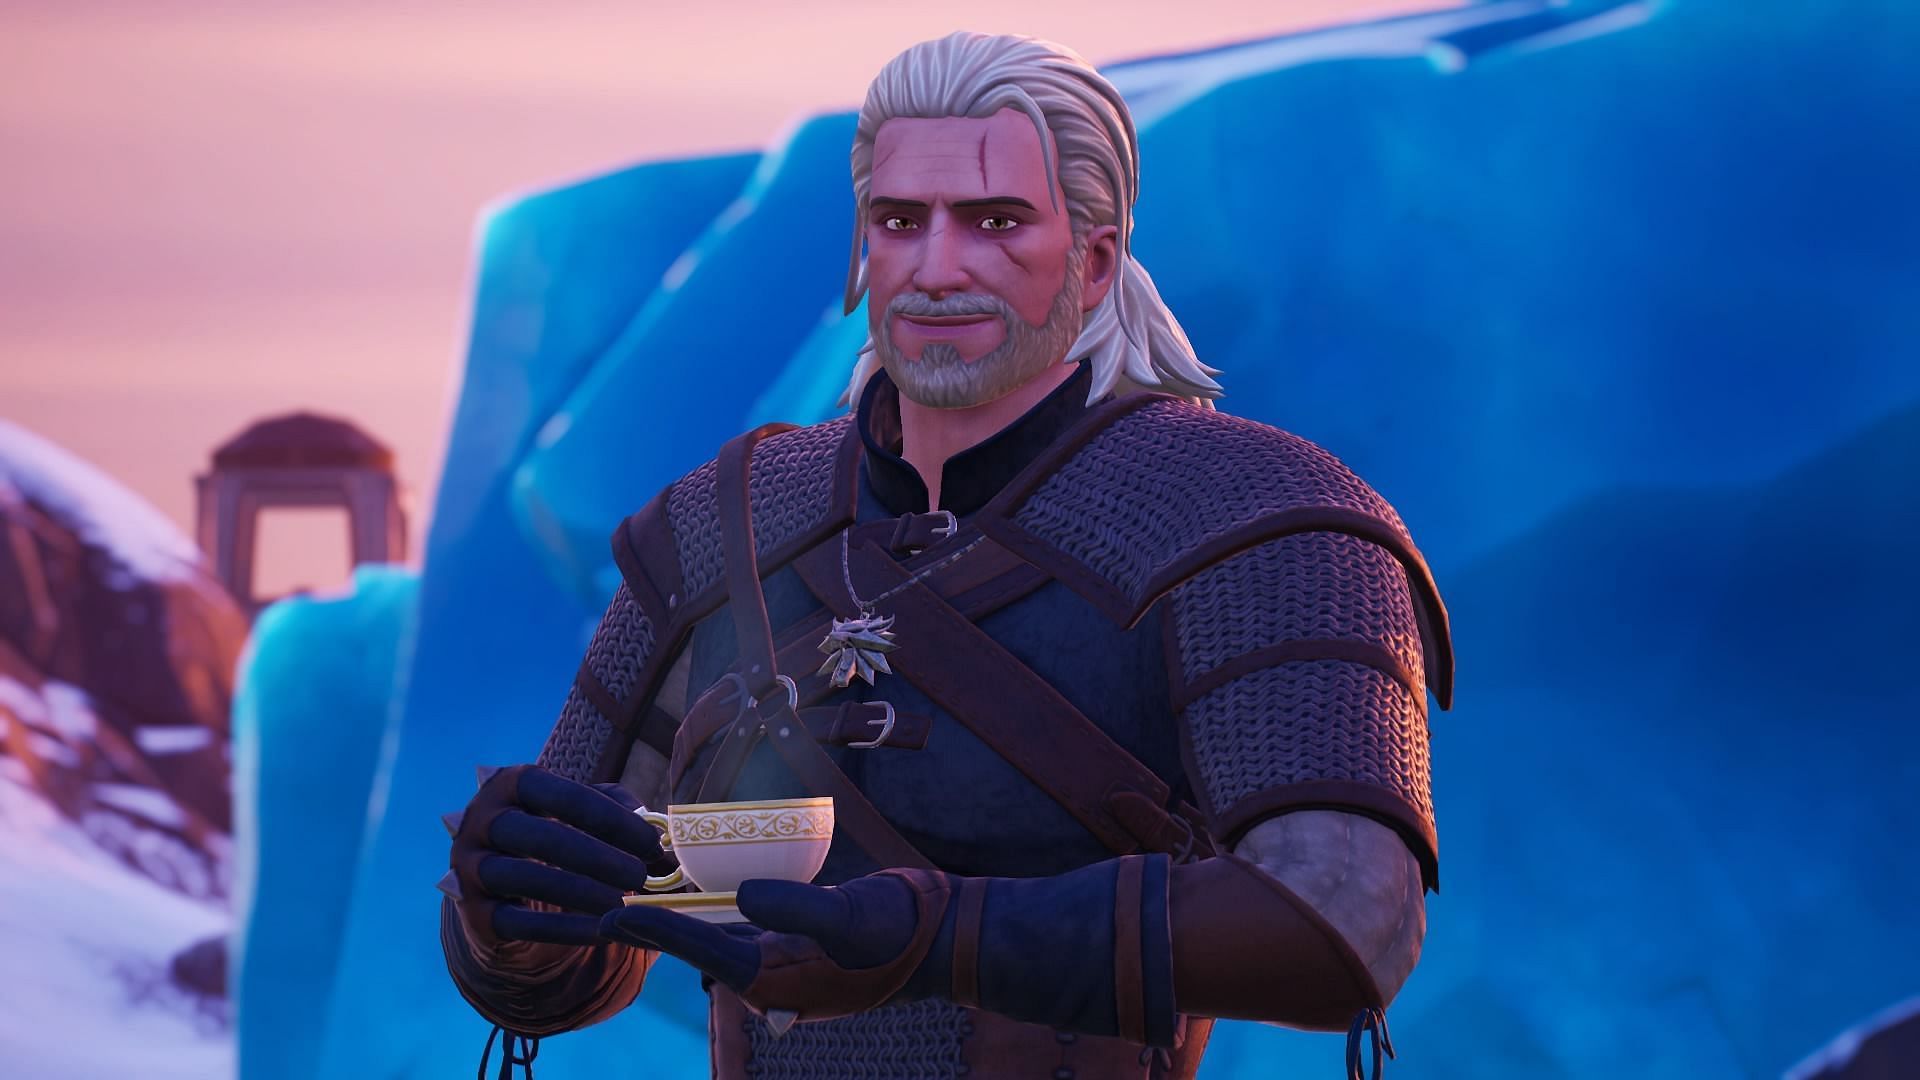 Geralt of Rivia is enjoying a cuppa while waiting for the Fortnite downtime to end (Image via Twitter/Jokernz_)